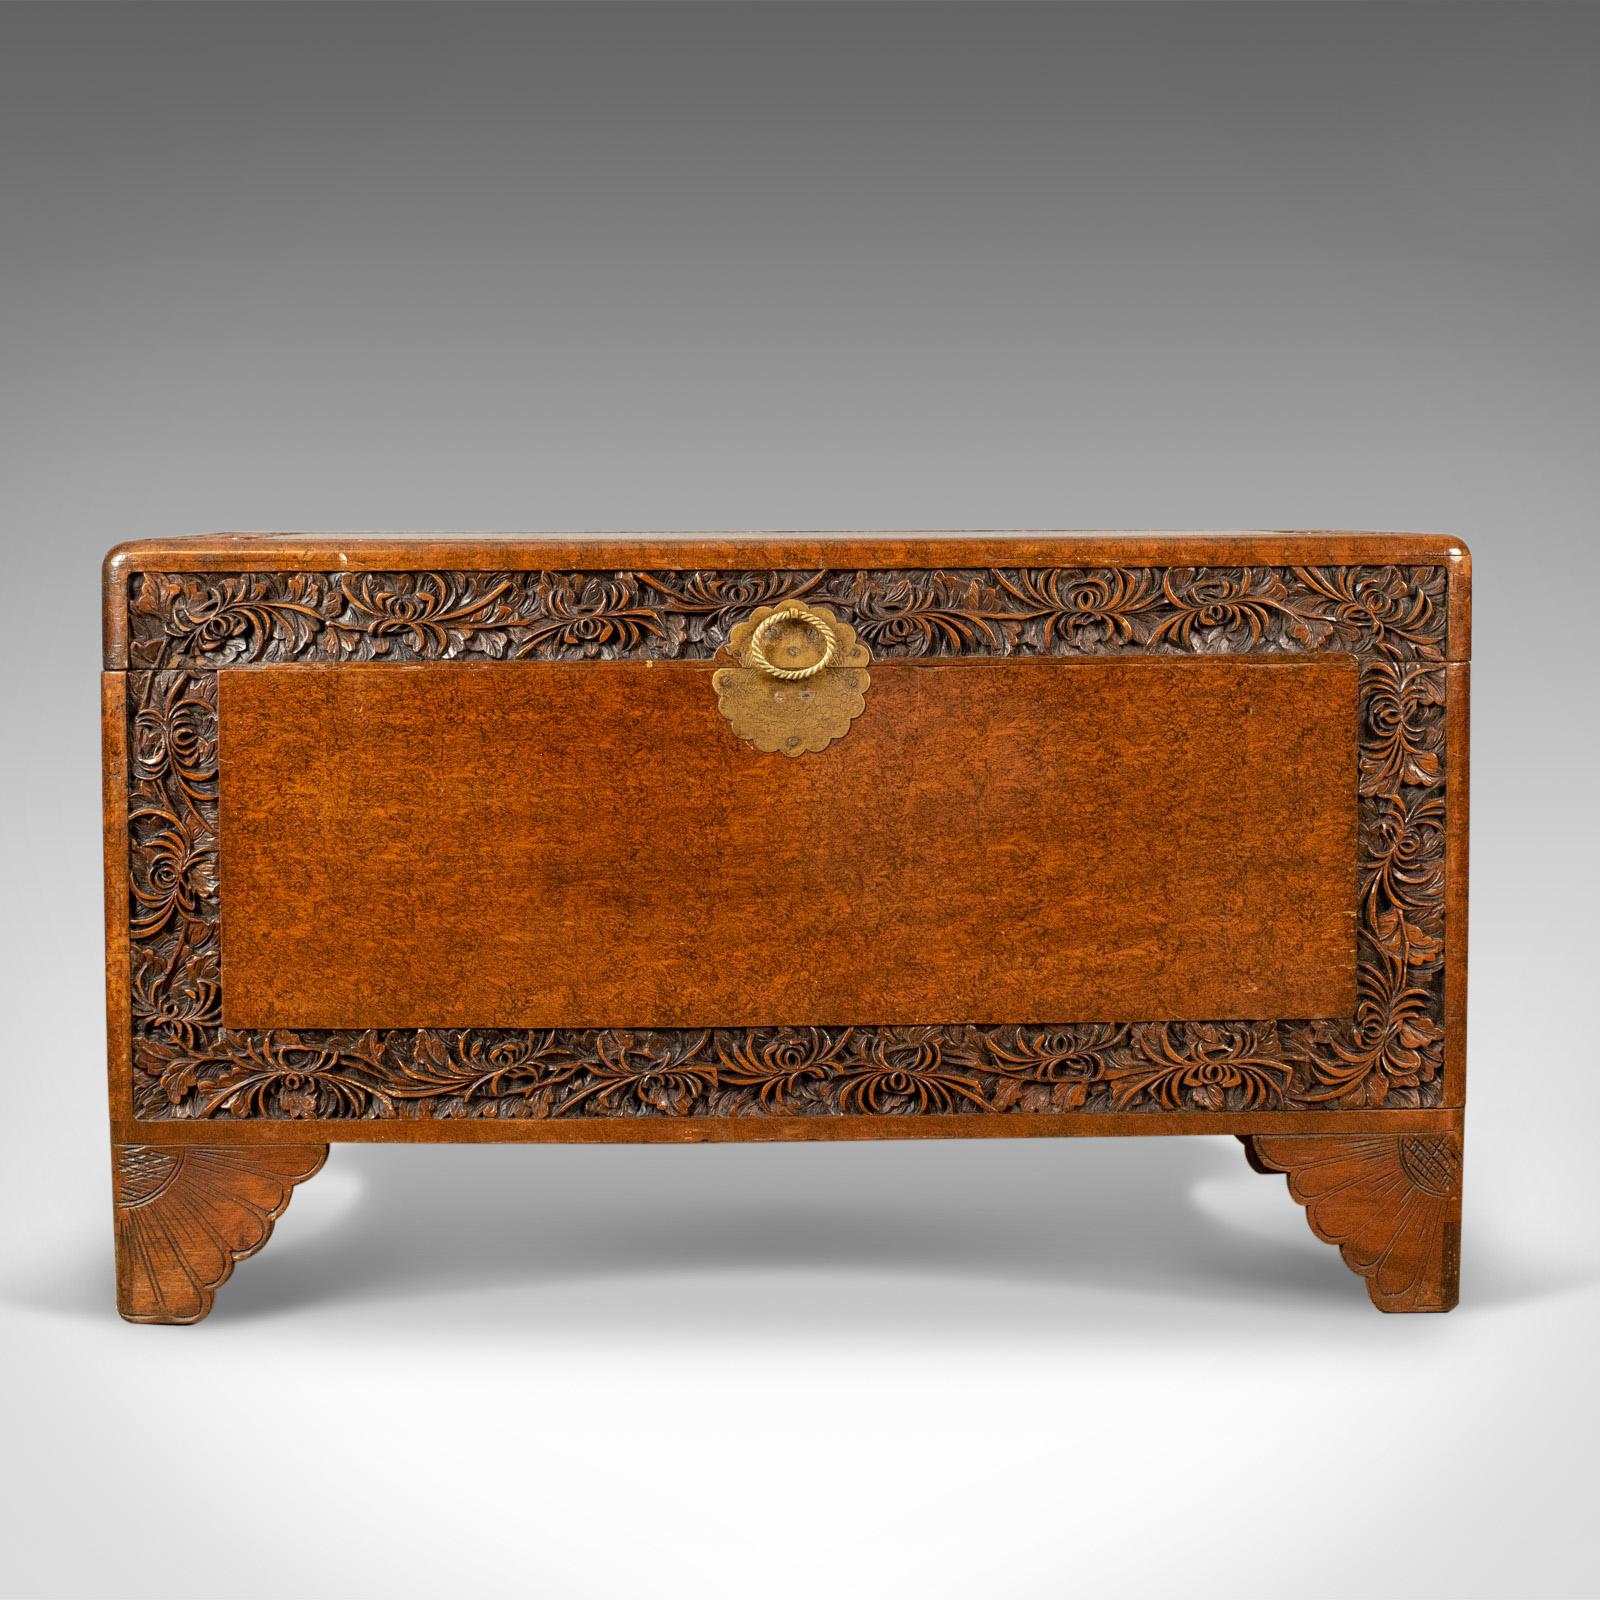 This is a camphor wood trunk, an oriental, carved chest dating to the late Art Deco period, circa 1940.

Of quality craftsmanship and stock
Attractive grain interest in warm russet hues
Solidly constructed with brass handle and etched back